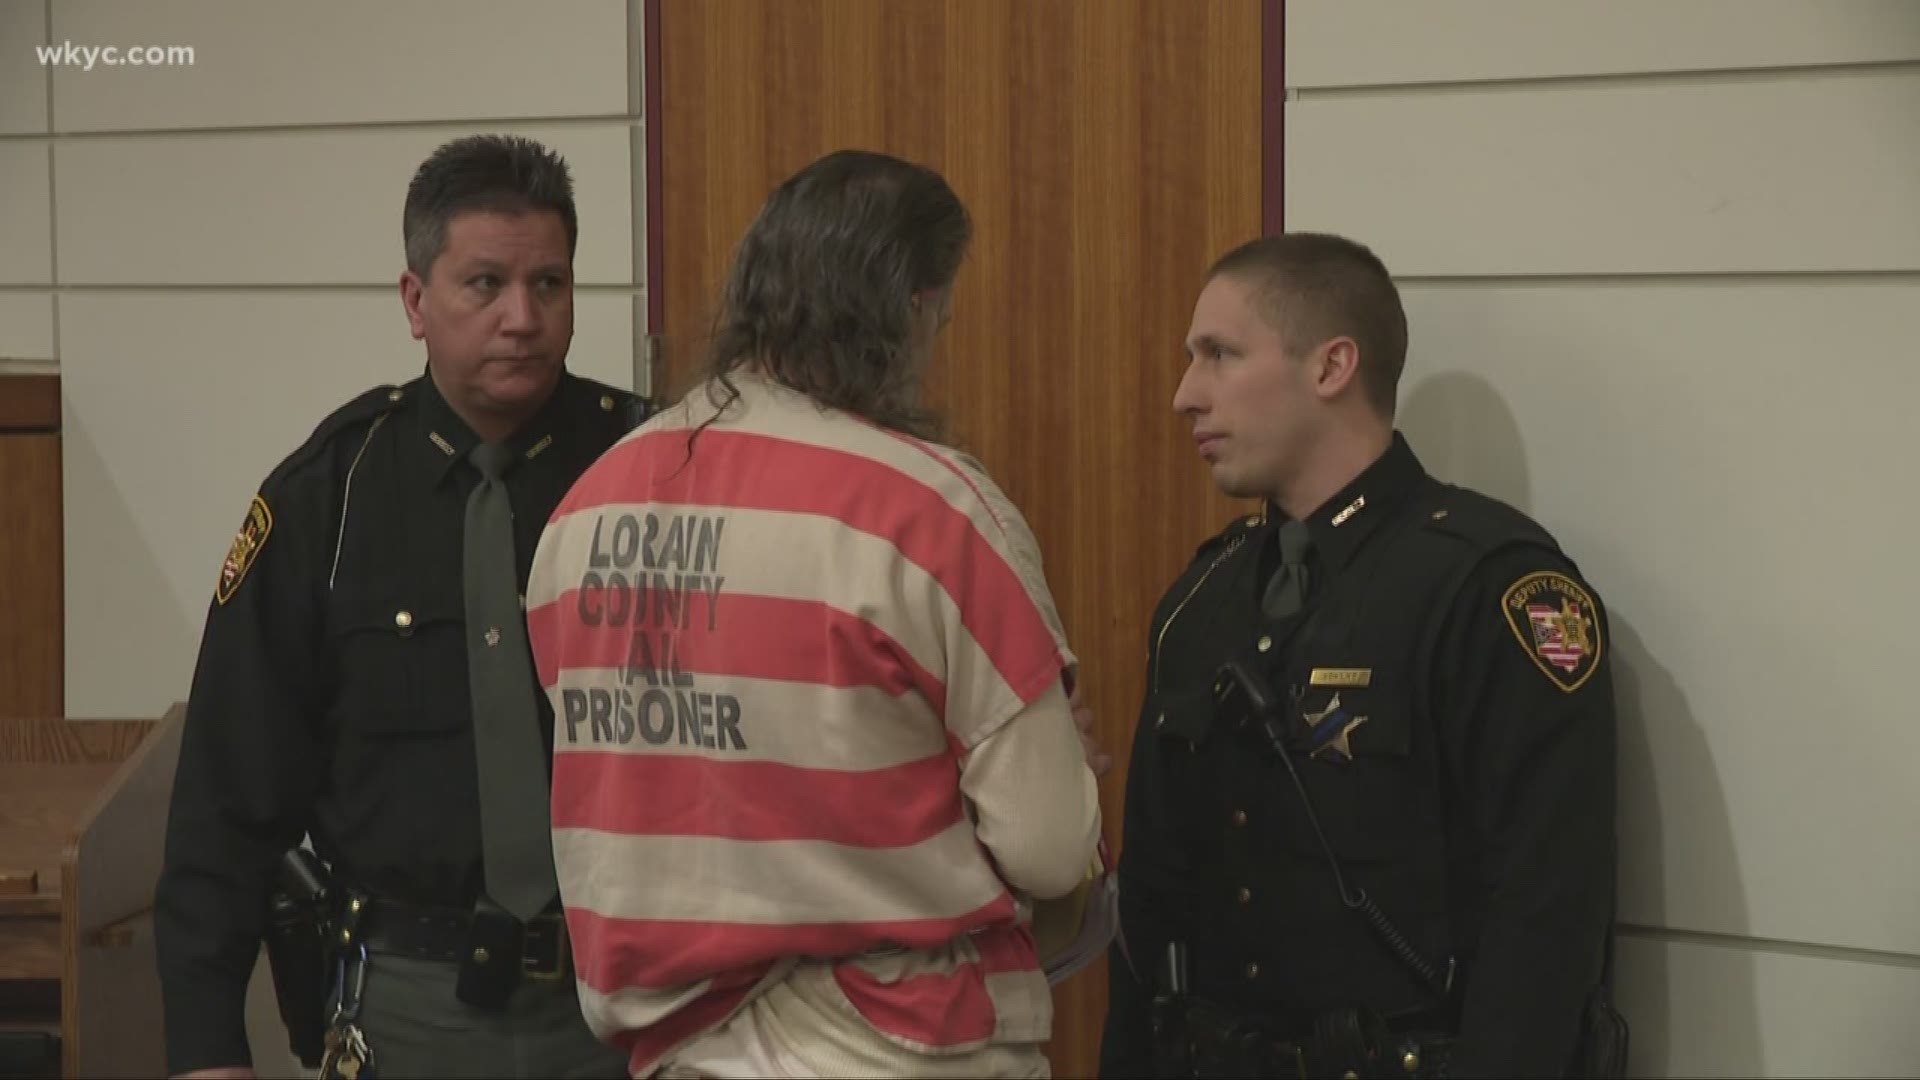 He ended up exiting the courtroom as the verdicts were read. Brandon Simmons reports.